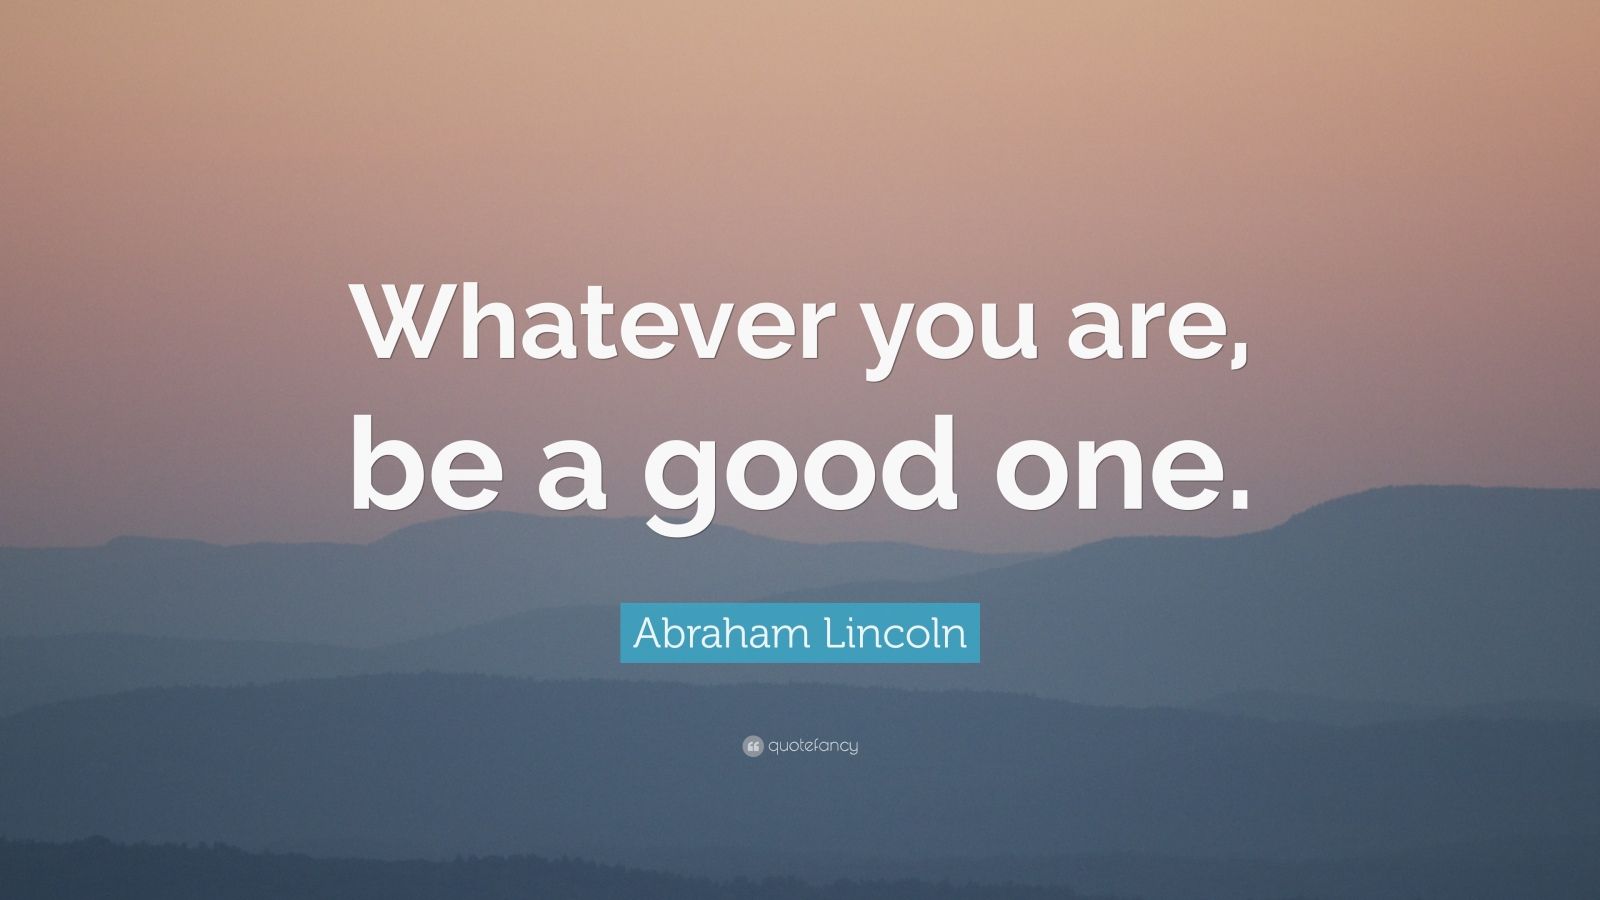 Abraham Lincoln Quote: “Whatever you are, be a good one.” (23 wallpapers) - Quotefancy